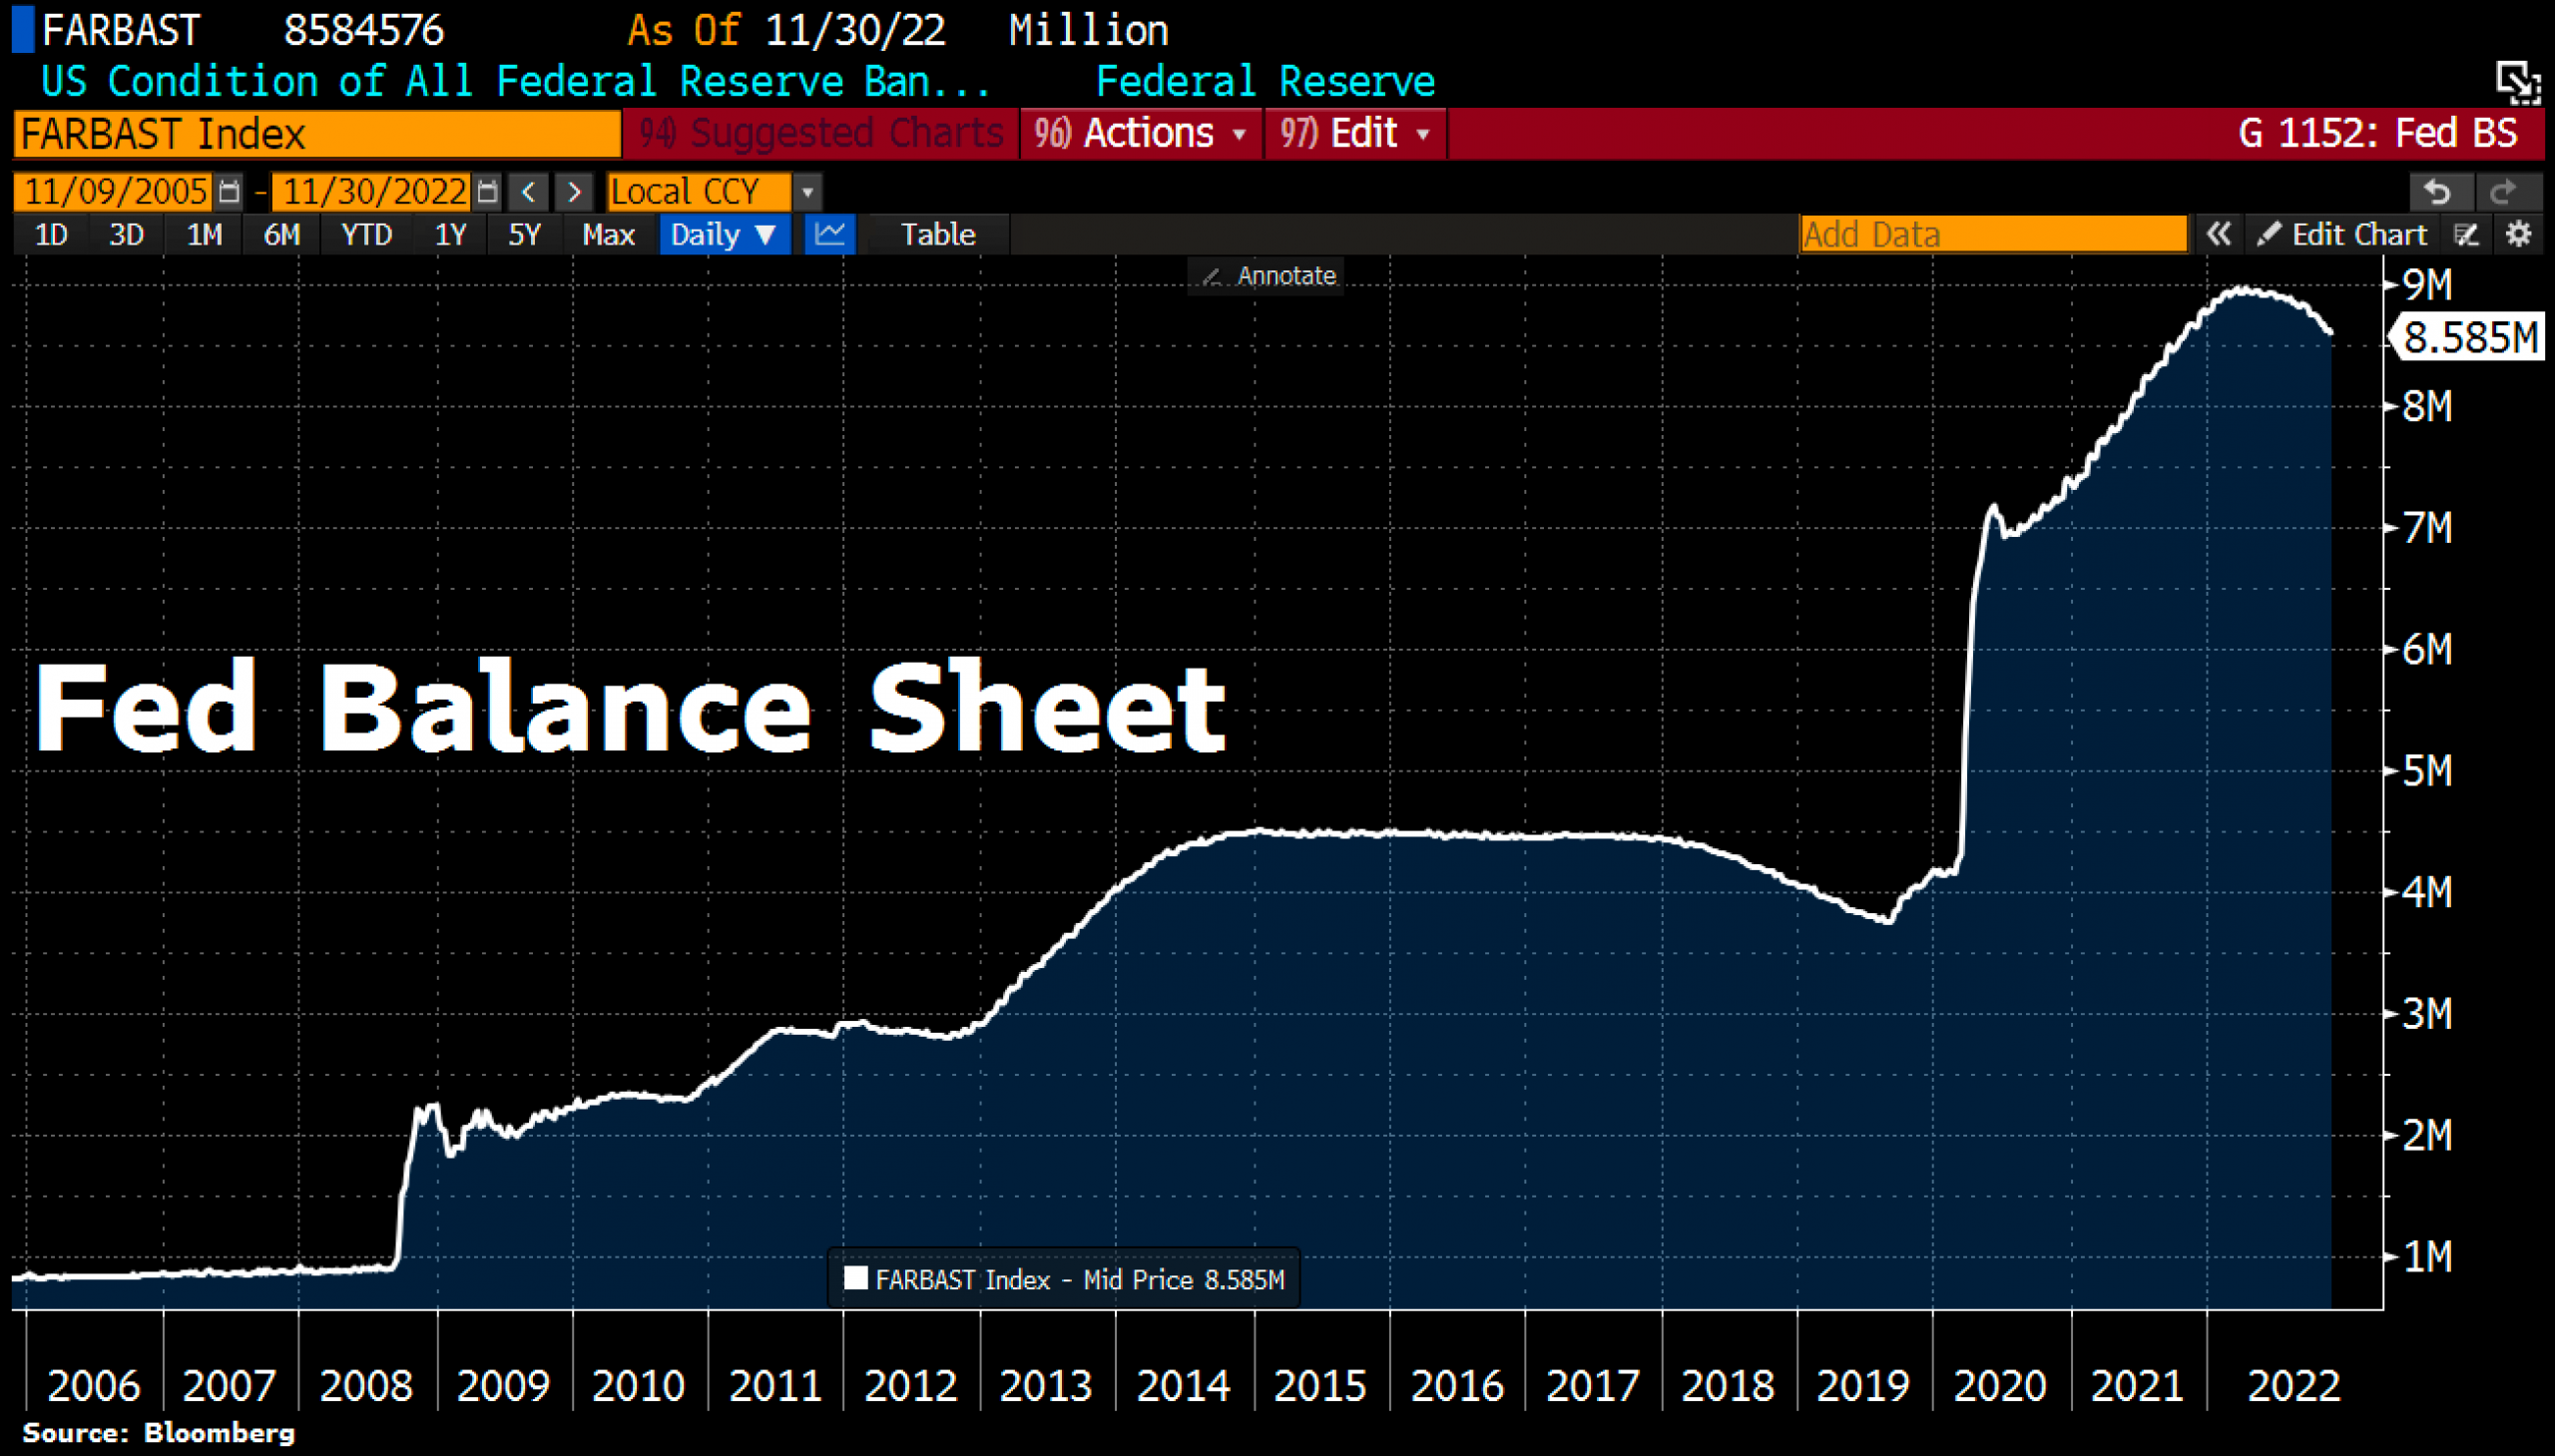 FED balance sheet as of November 30th, 2022. Source: Holger Zschaepitz December 12th, 2022, Bitcoin – Price hardly reacts to bad news anymore